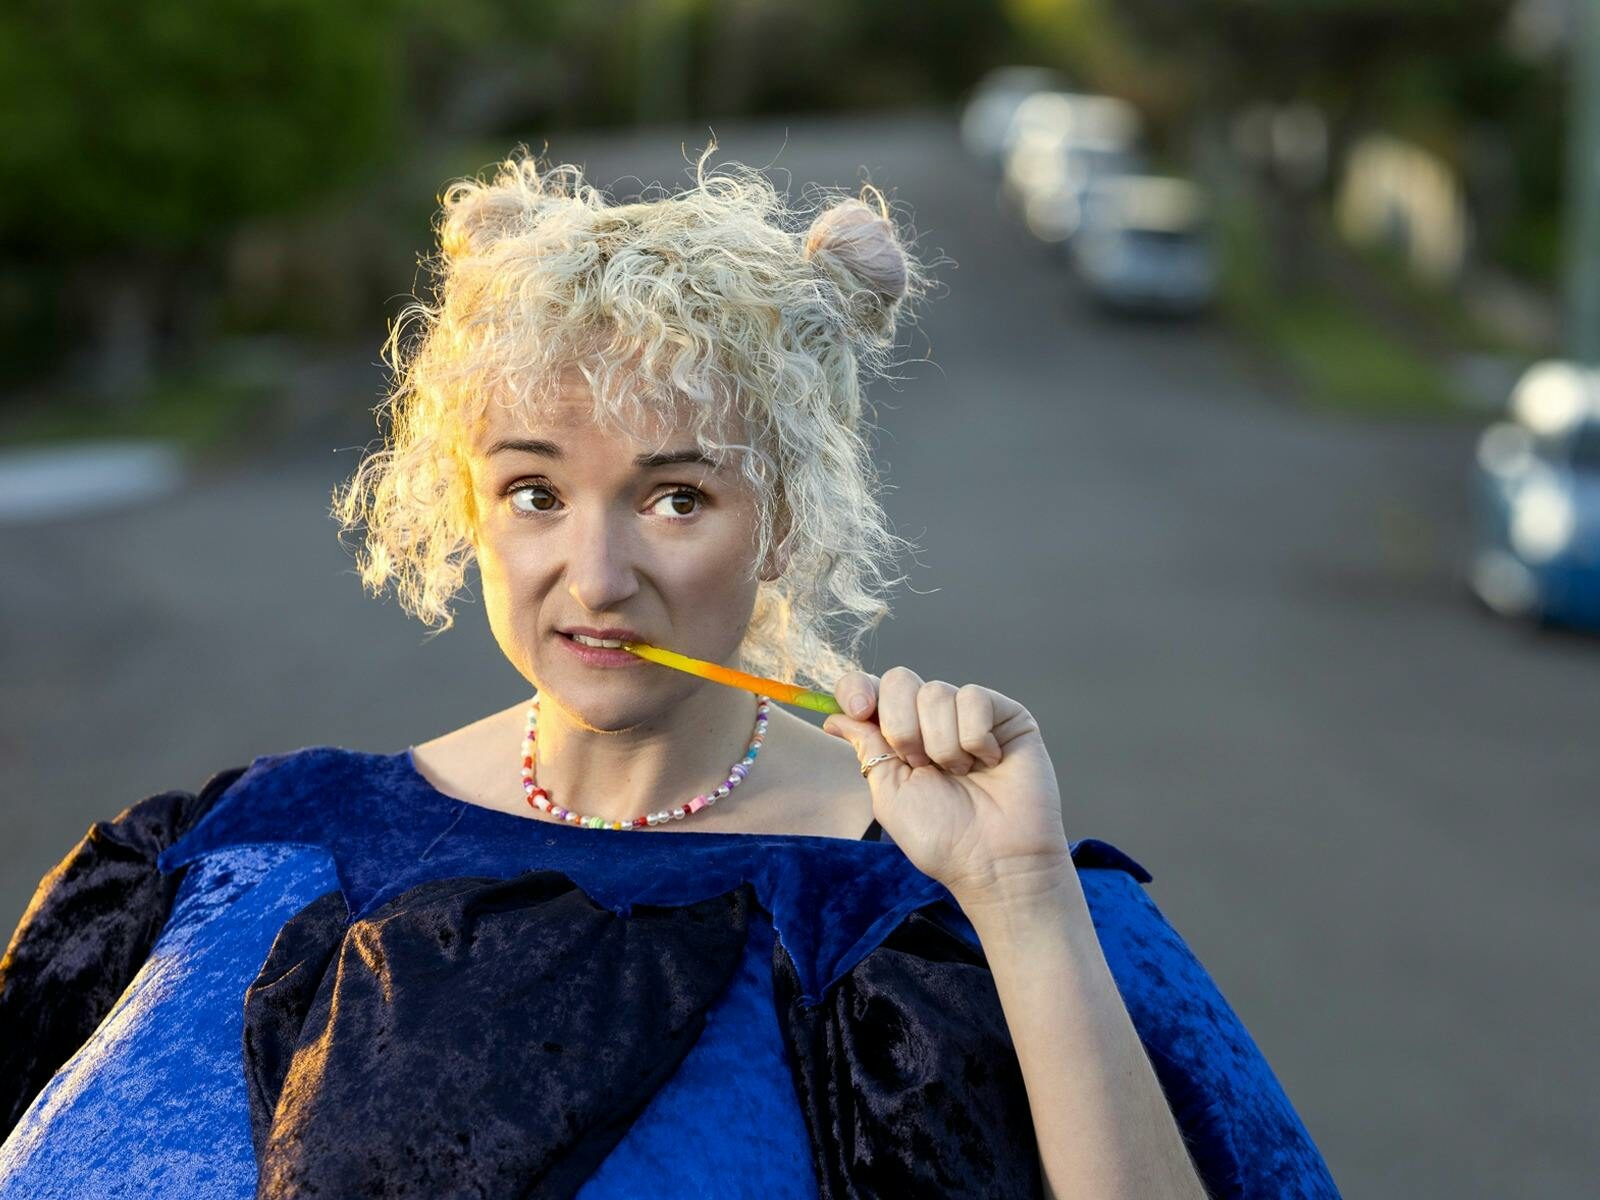 A young woman with blonde curly hair in 2 buns stands in a bluberry costume in the street.